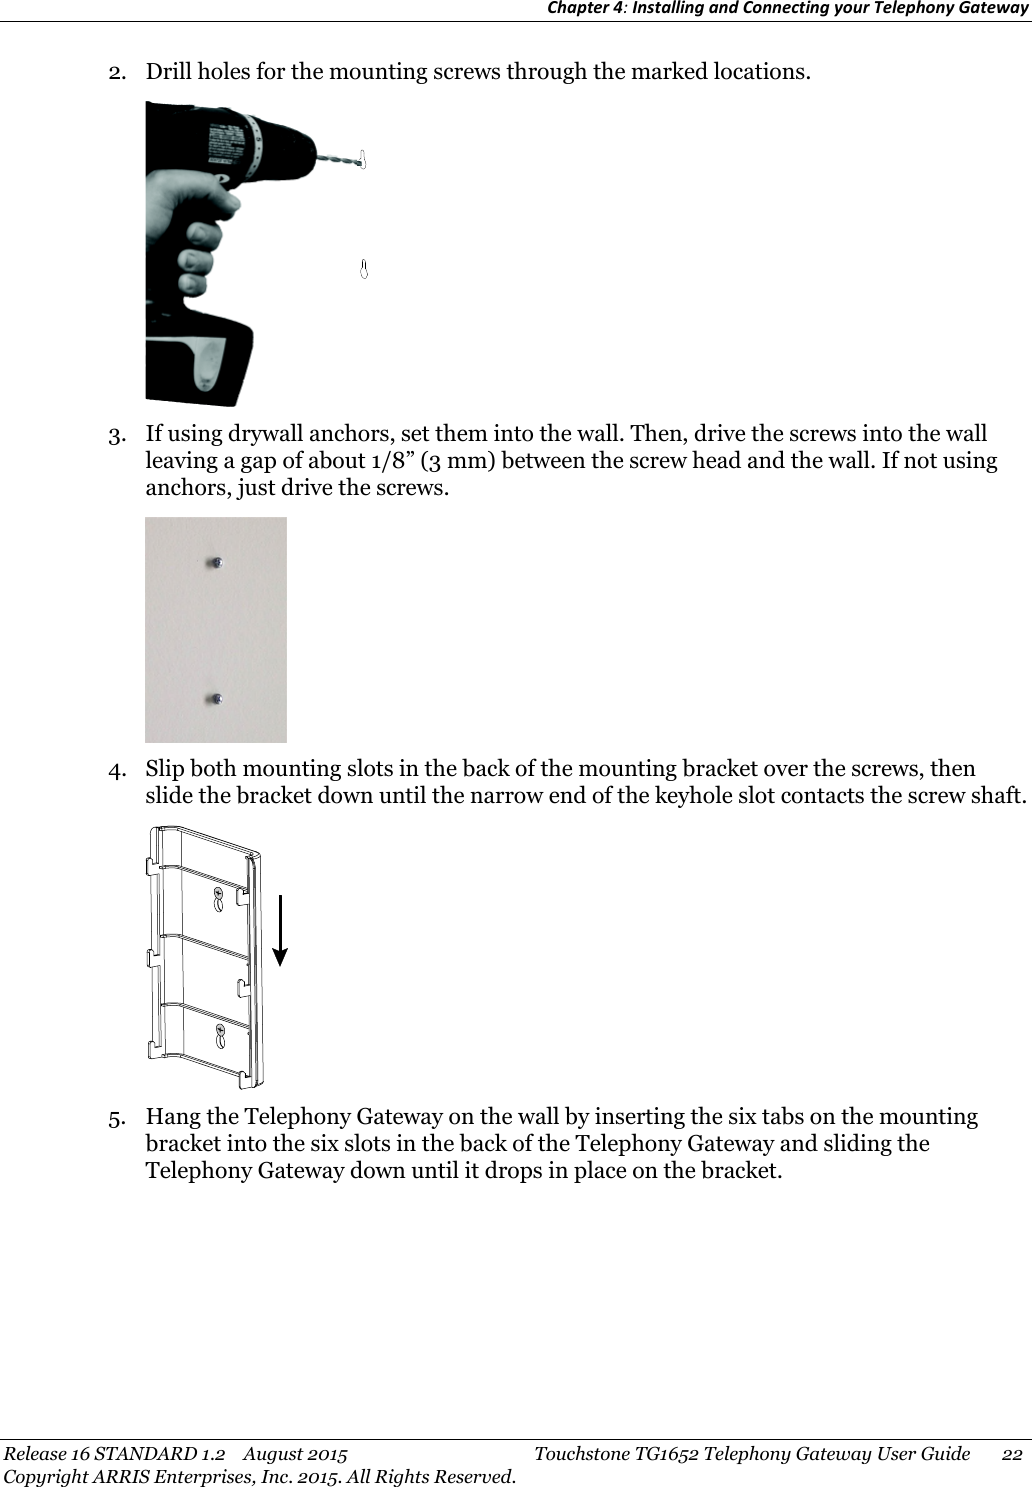 Chapter 4:Installing and Connecting your Telephony GatewayRelease 16 STANDARD 1.2 August 2015 Touchstone TG1652 Telephony Gateway User Guide 22Copyright ARRIS Enterprises, Inc. 2015. All Rights Reserved.2. Drill holes for the mounting screws through the marked locations.3. If using drywall anchors, set them into the wall. Then, drive the screws into the wallleaving a gap of about 1/8” (3 mm) between the screw head and the wall. If not usinganchors, just drive the screws.4. Slip both mounting slots in the back of the mounting bracket over the screws, thenslide the bracket down until the narrow end of the keyhole slot contacts the screw shaft.5. Hang the Telephony Gateway on the wall by inserting the six tabs on the mountingbracket into the six slots in the back of the Telephony Gateway and sliding theTelephony Gateway down until it drops in place on the bracket.